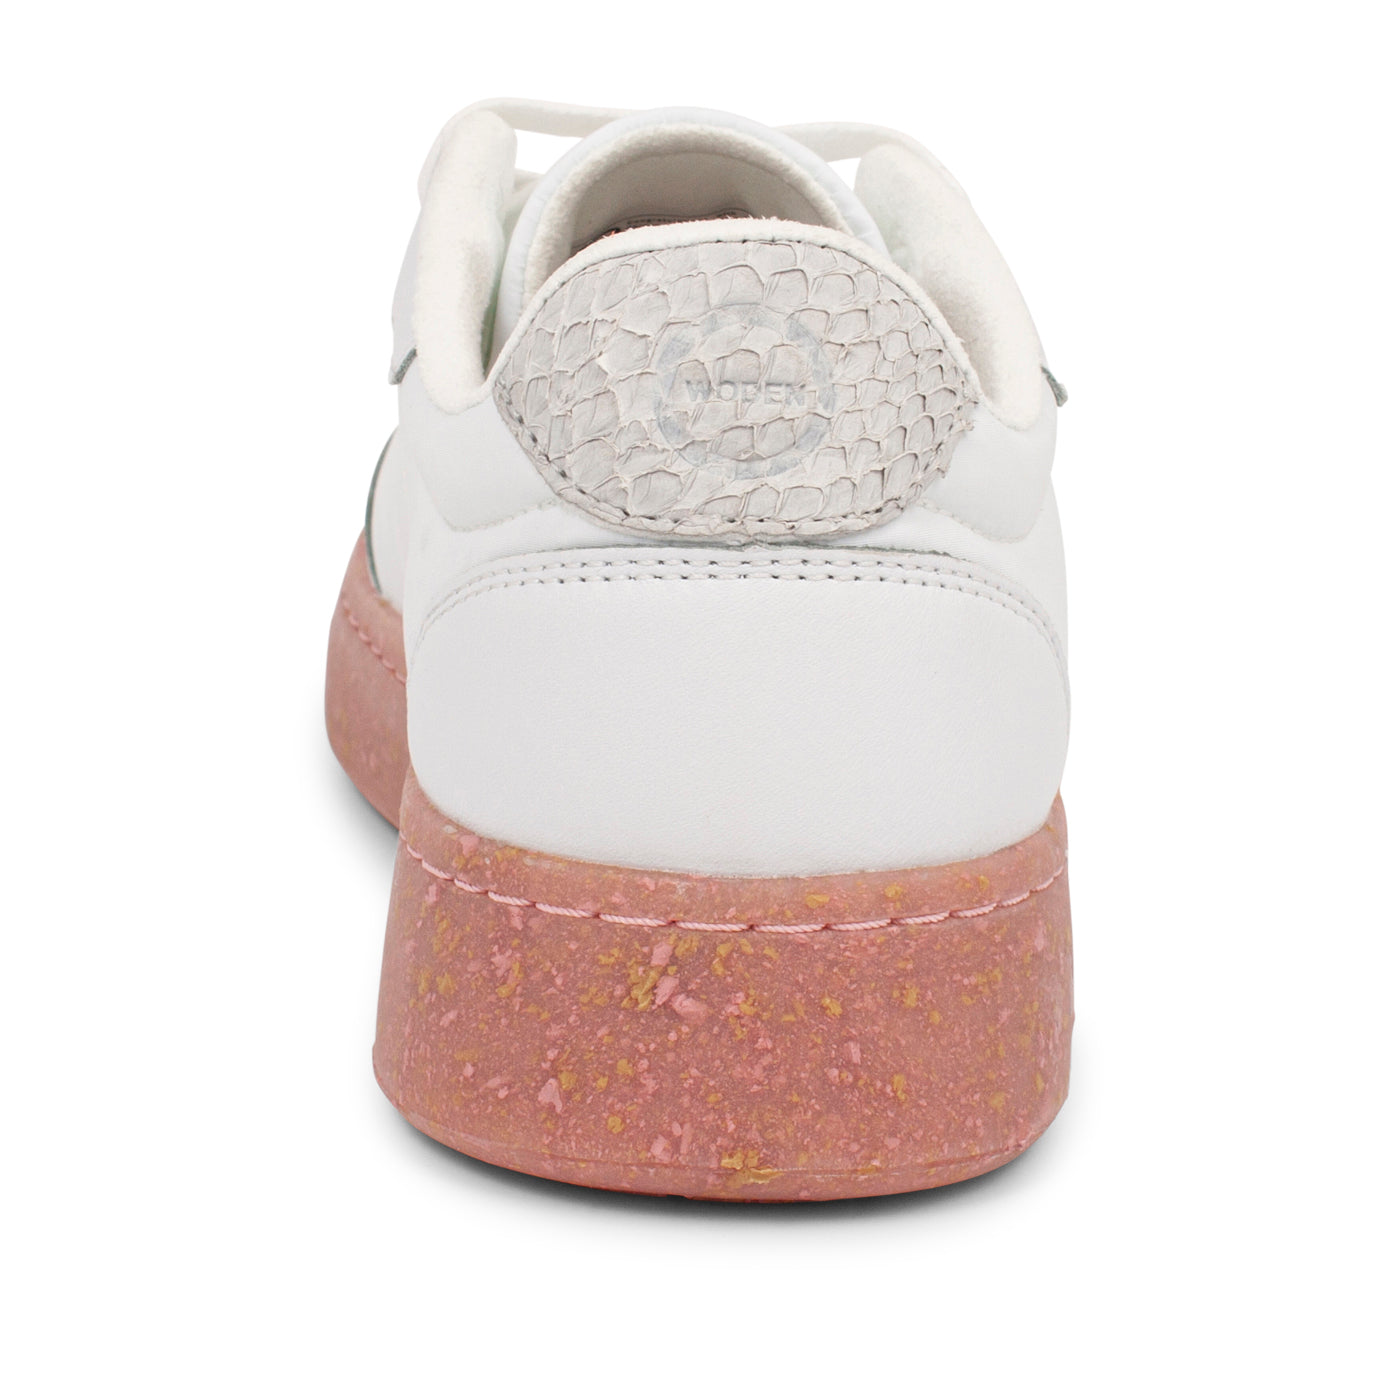 WODEN May II Sneakers 754 Bright White/ Soft Pink